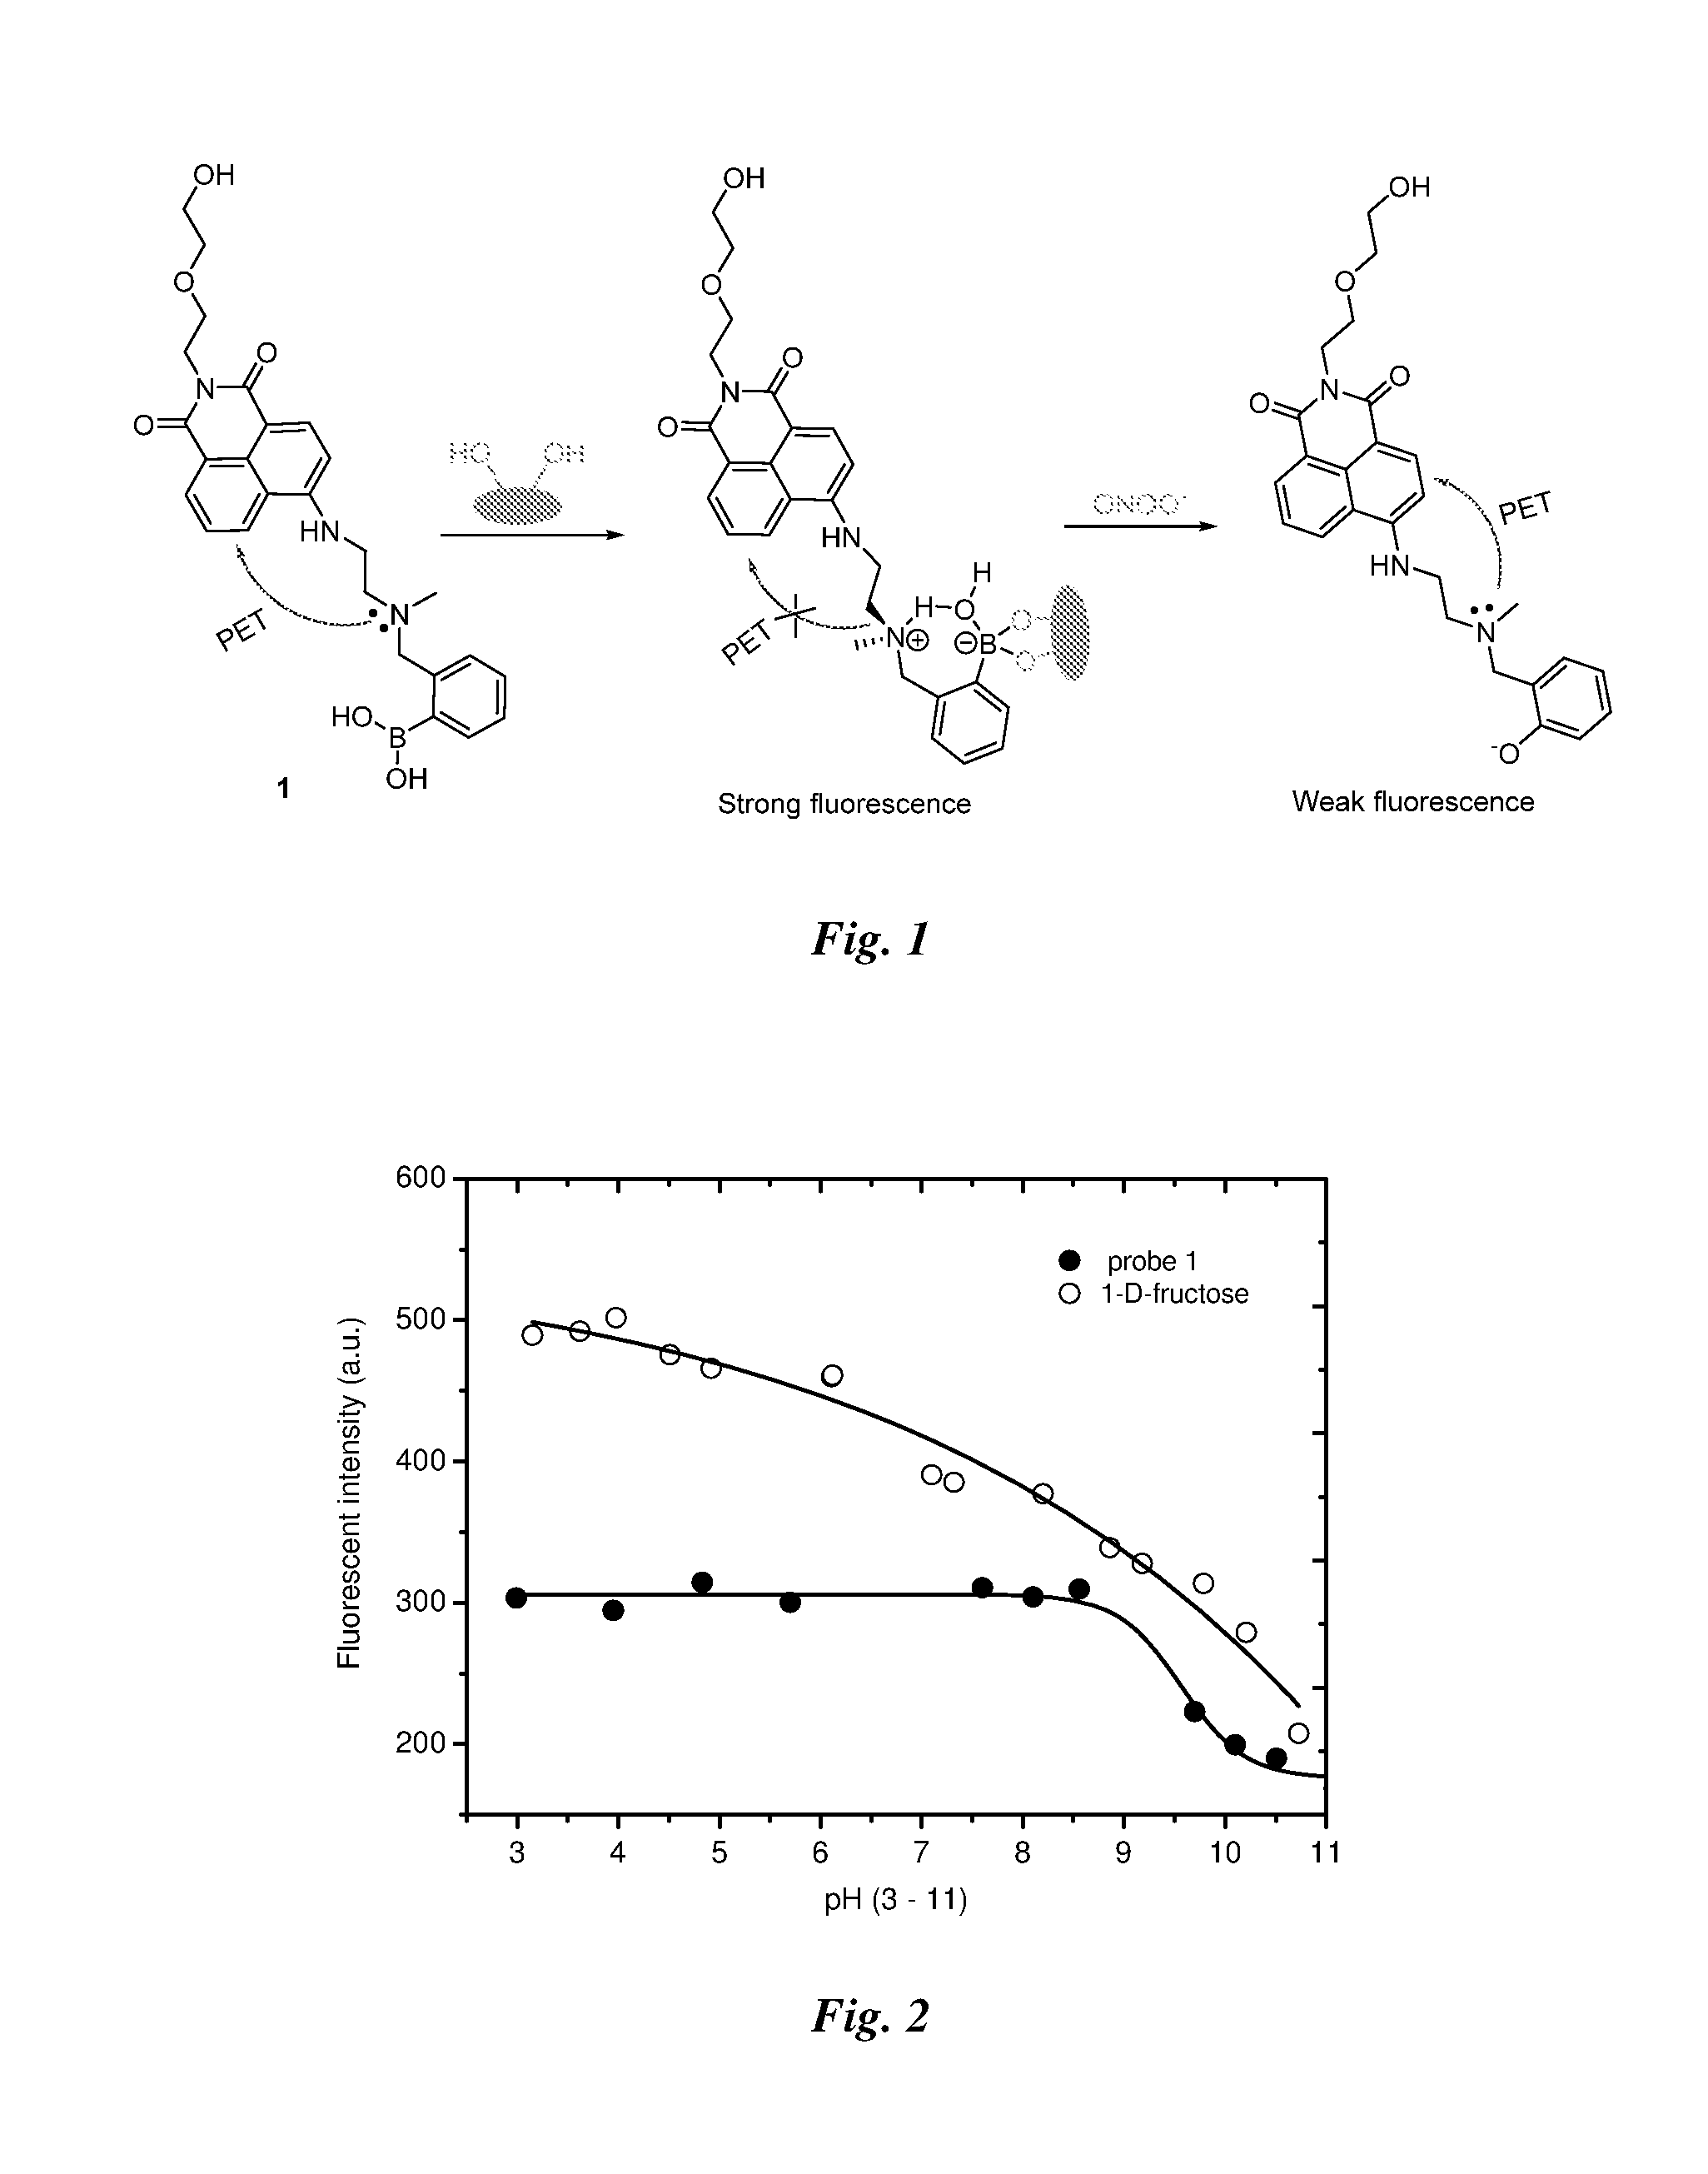 Method of detecting peroxynitrite using a complex of a saccharide and an arylboronate-based fluorescent probe